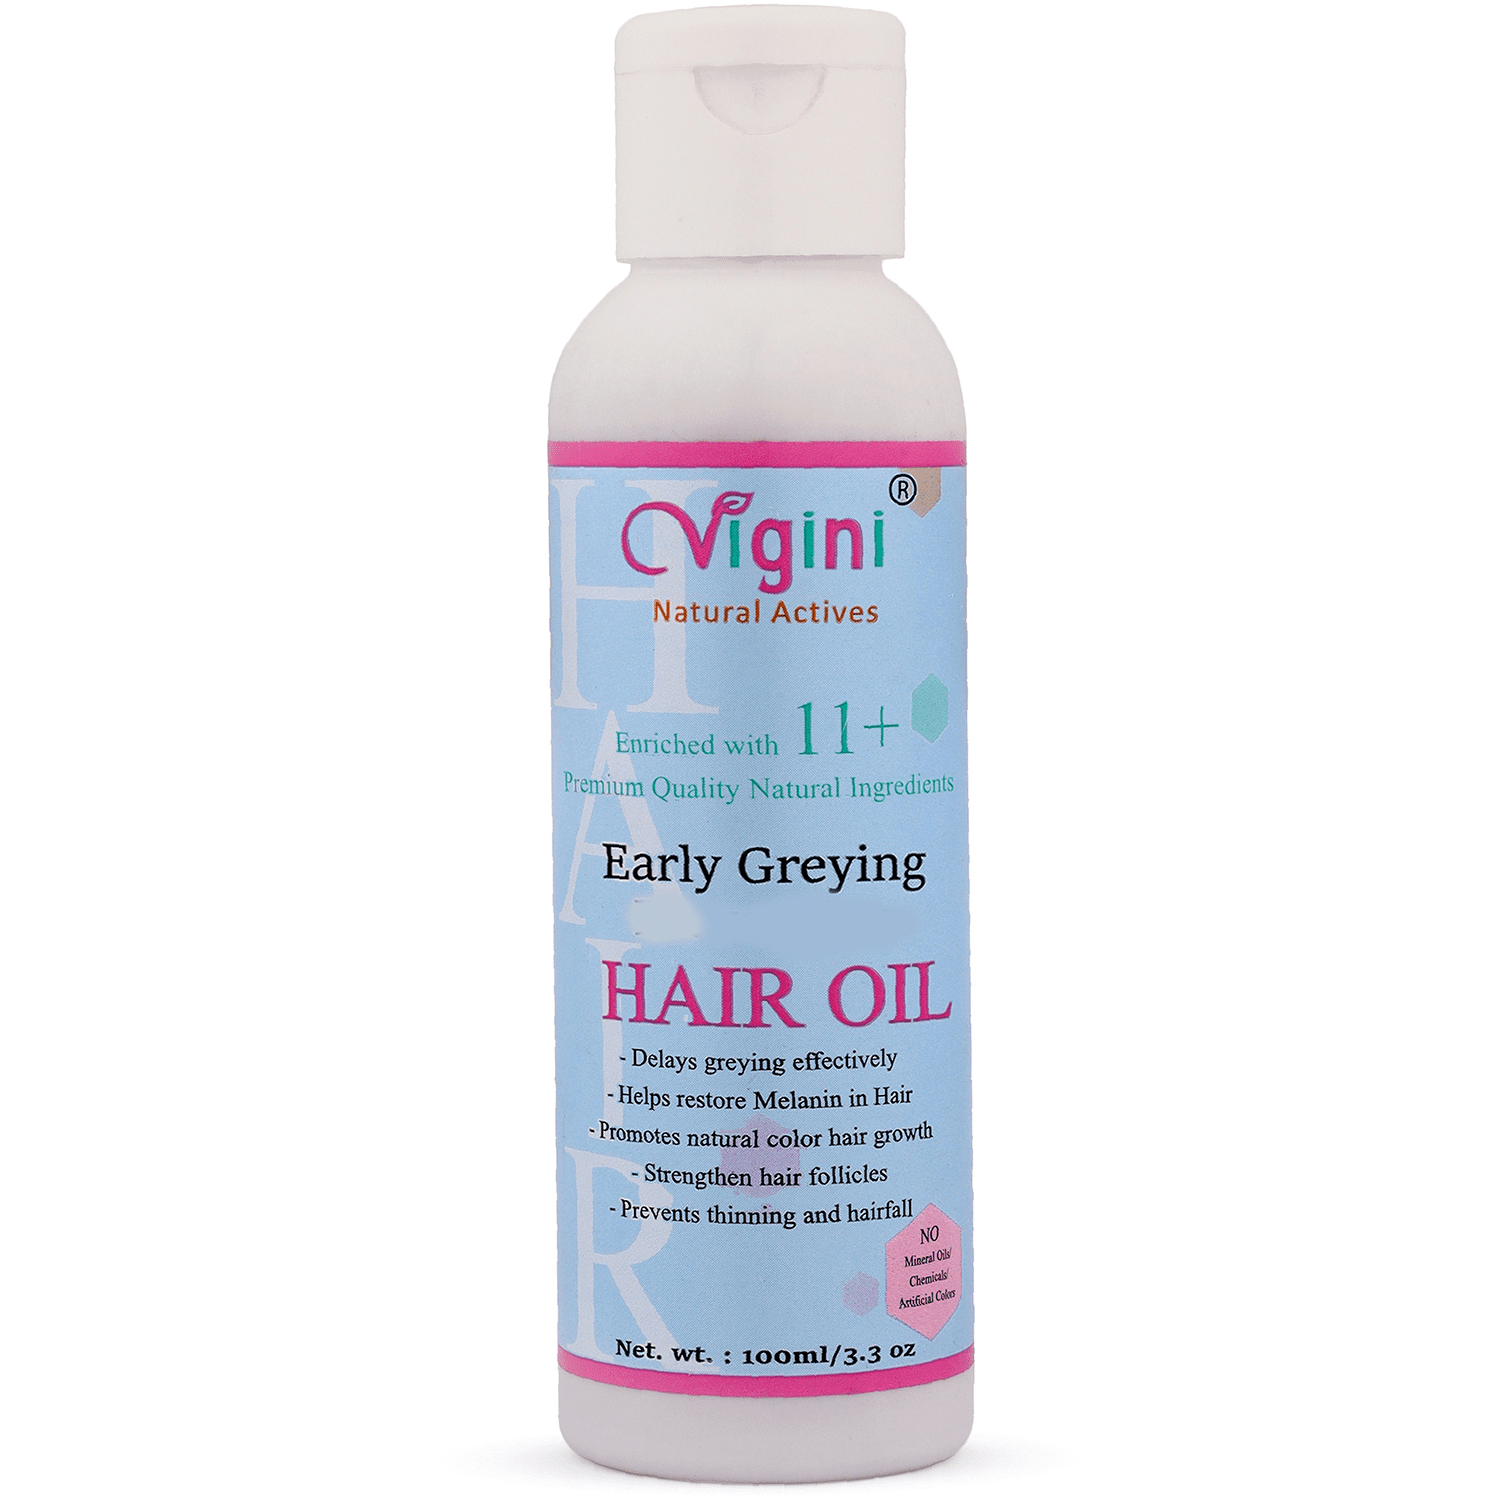 Early Greying Prevention Hair Oil 100ml and Hair Skin Nail (Biotin 10000Mg.) 30Caps